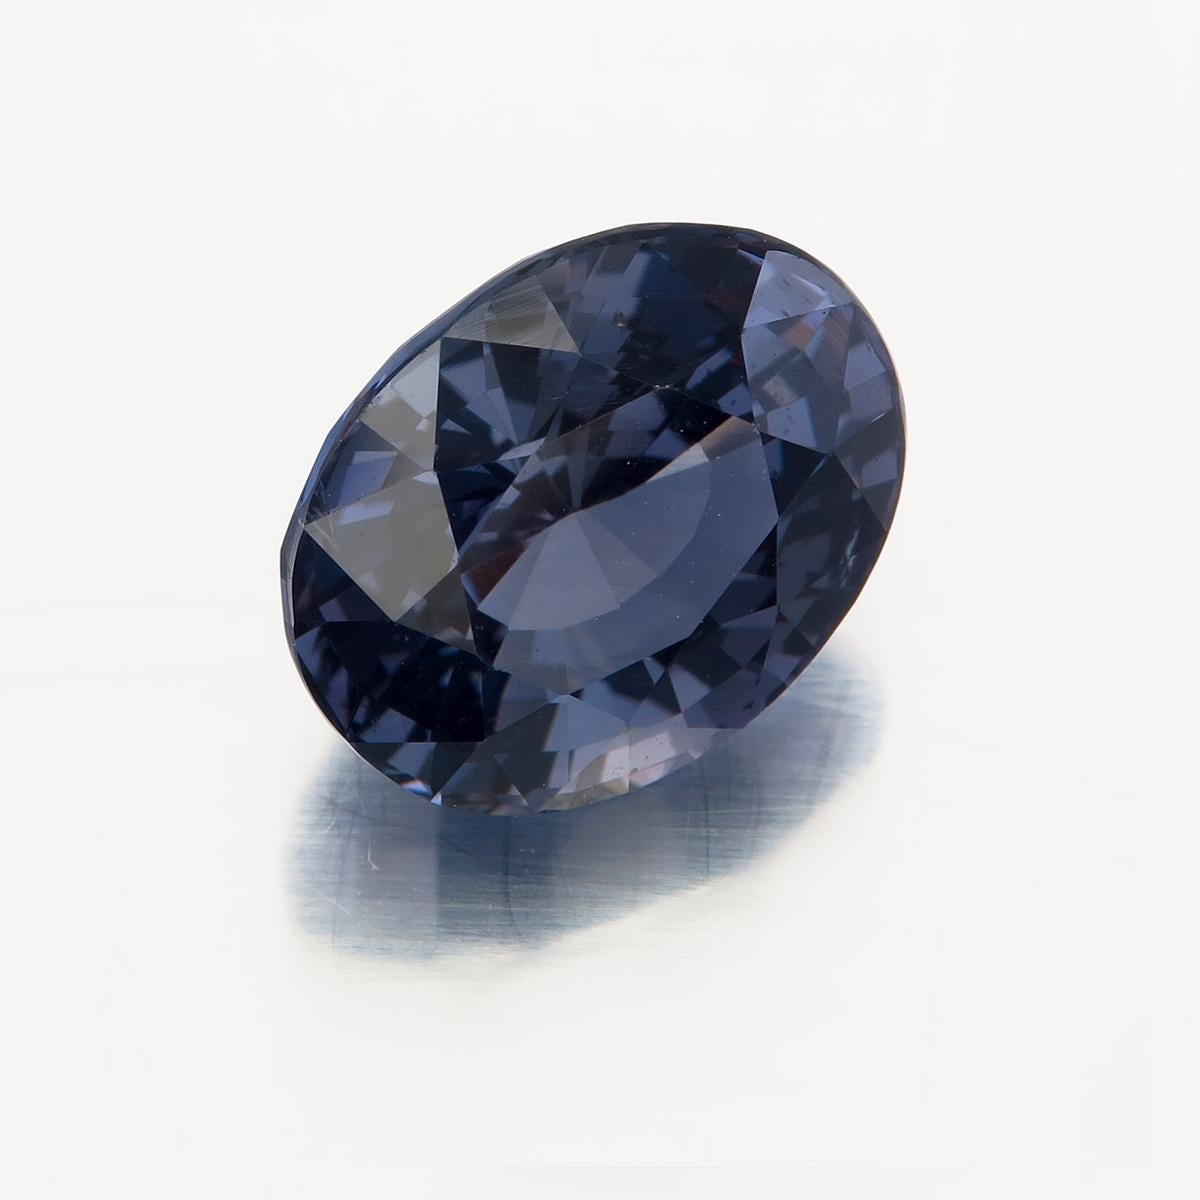 Lotus certified 3.60 carat Violet Spinel
weight: 3.60 carat 
Dimension: 10.24 x 8.10 x 5.88 mm
Color: Violet
Cut: Oval
No Heat
